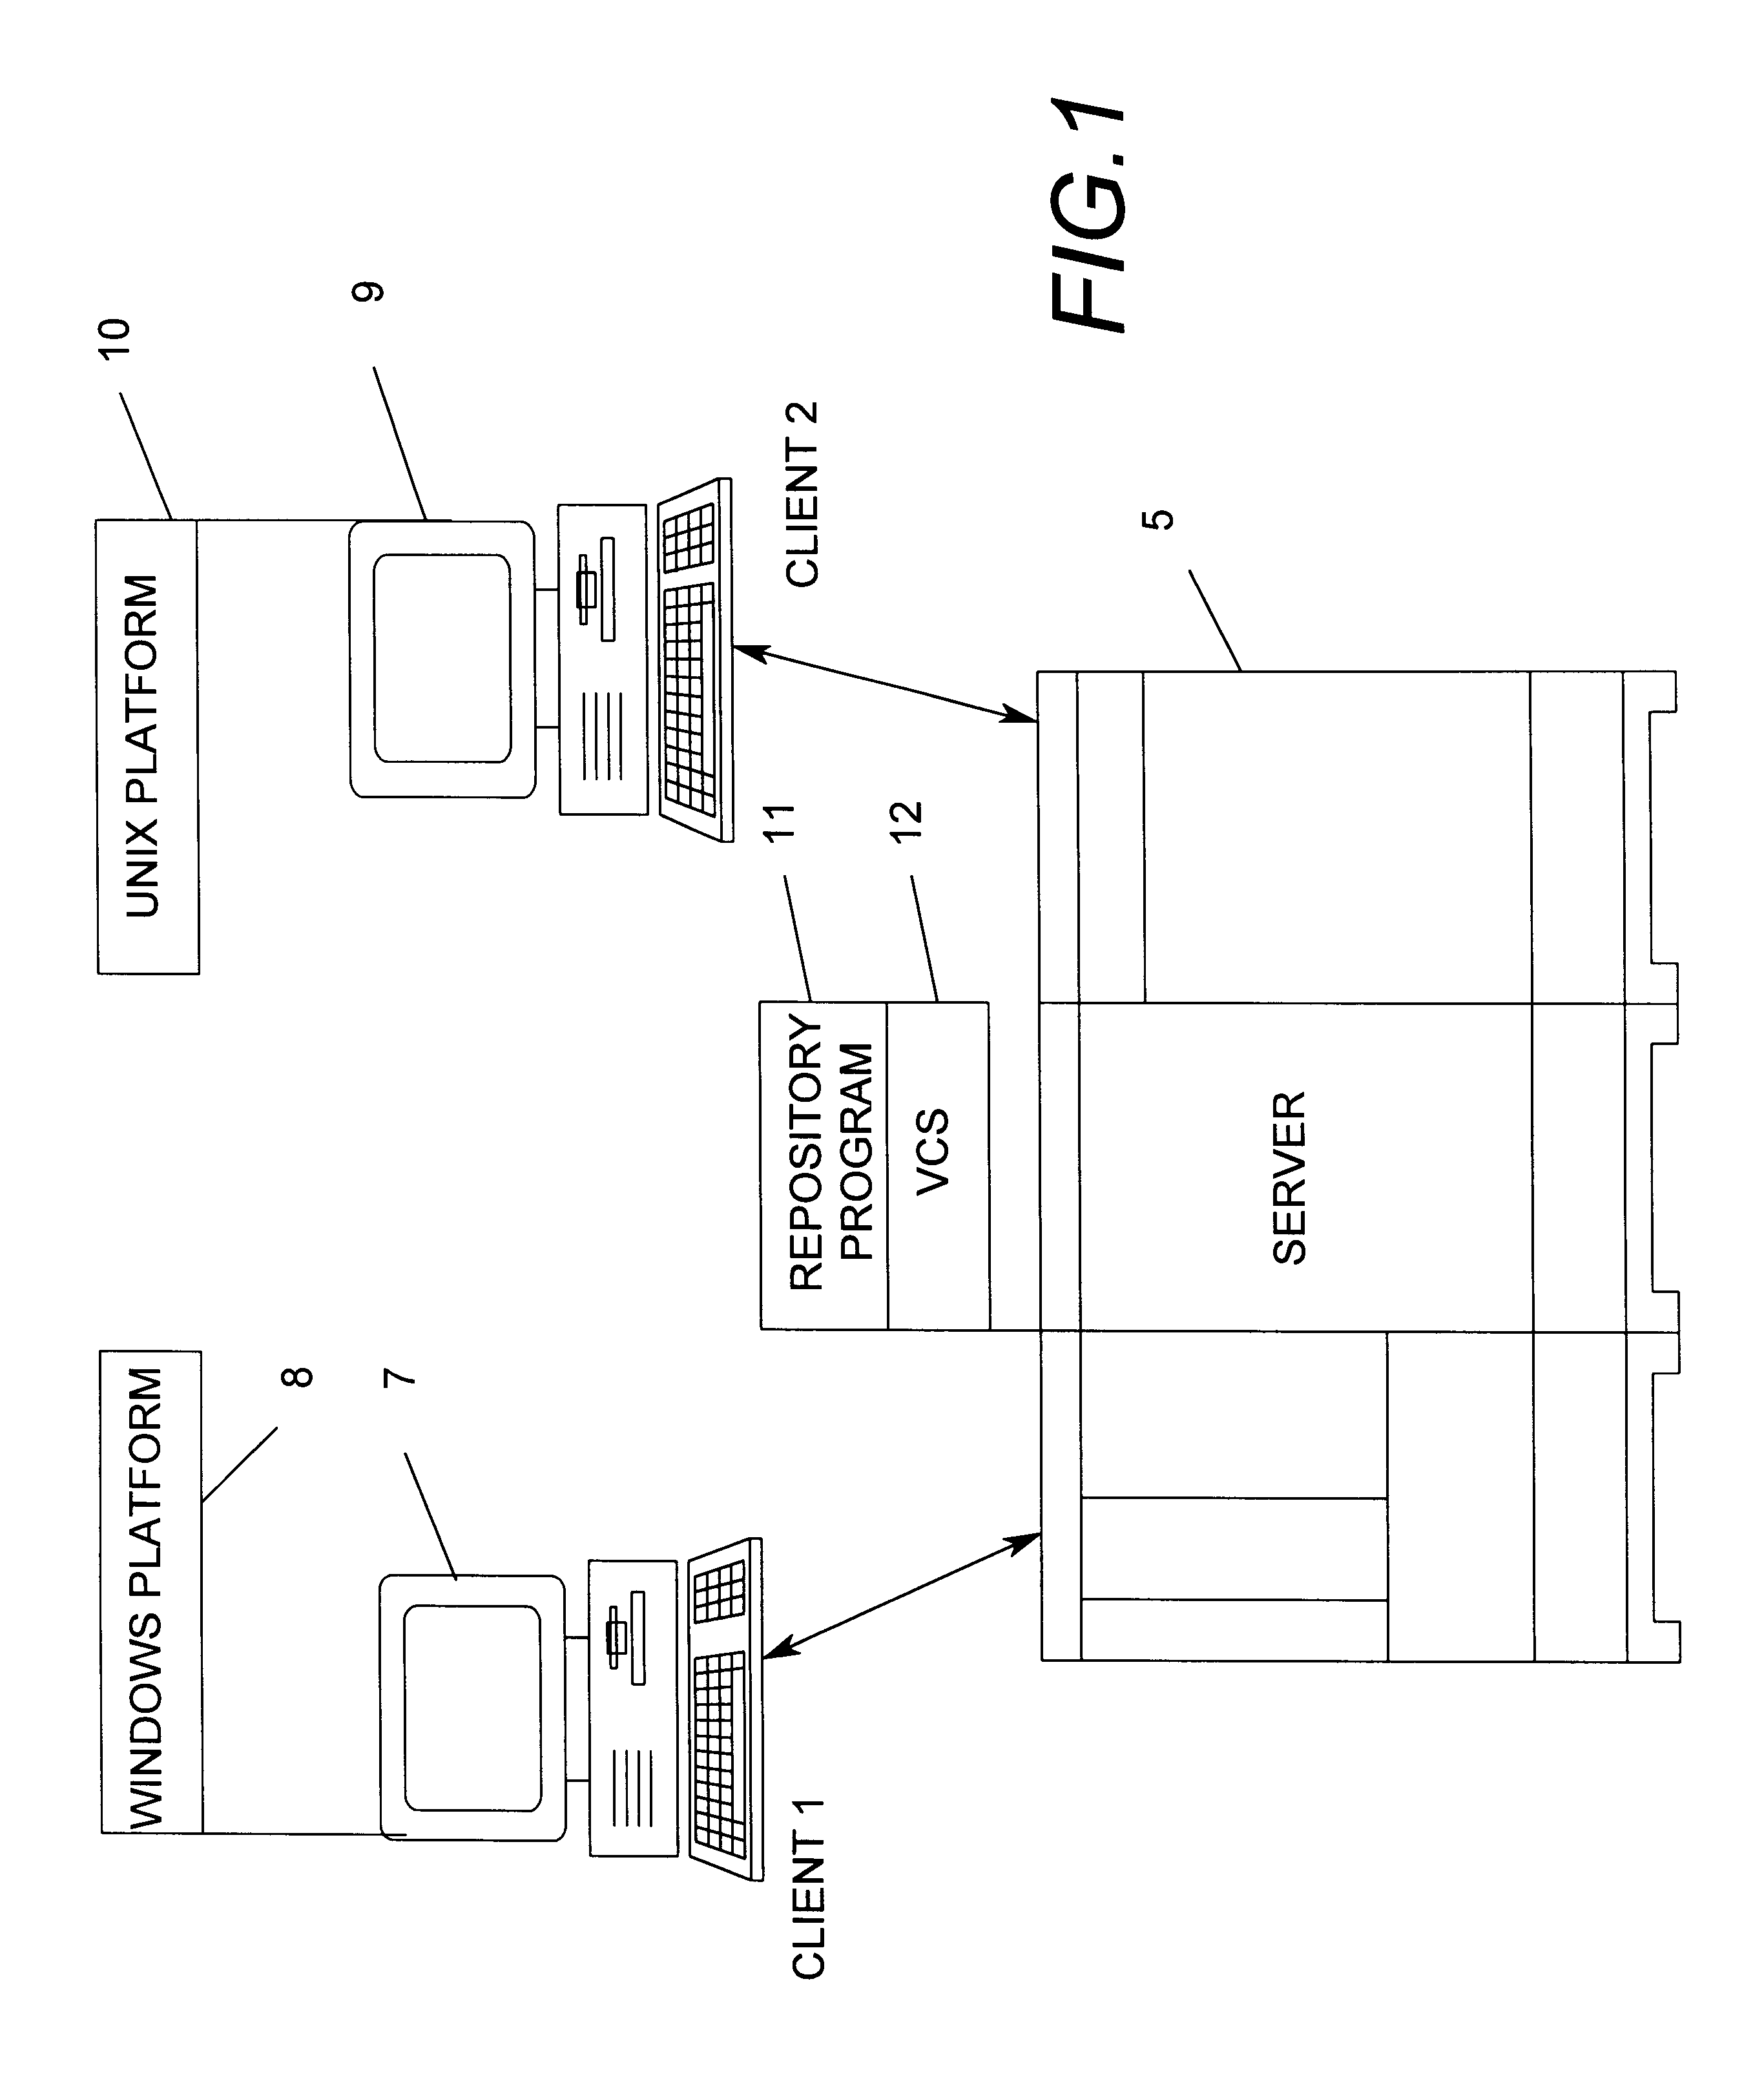 System and method for incorporating changes as a part of a software release